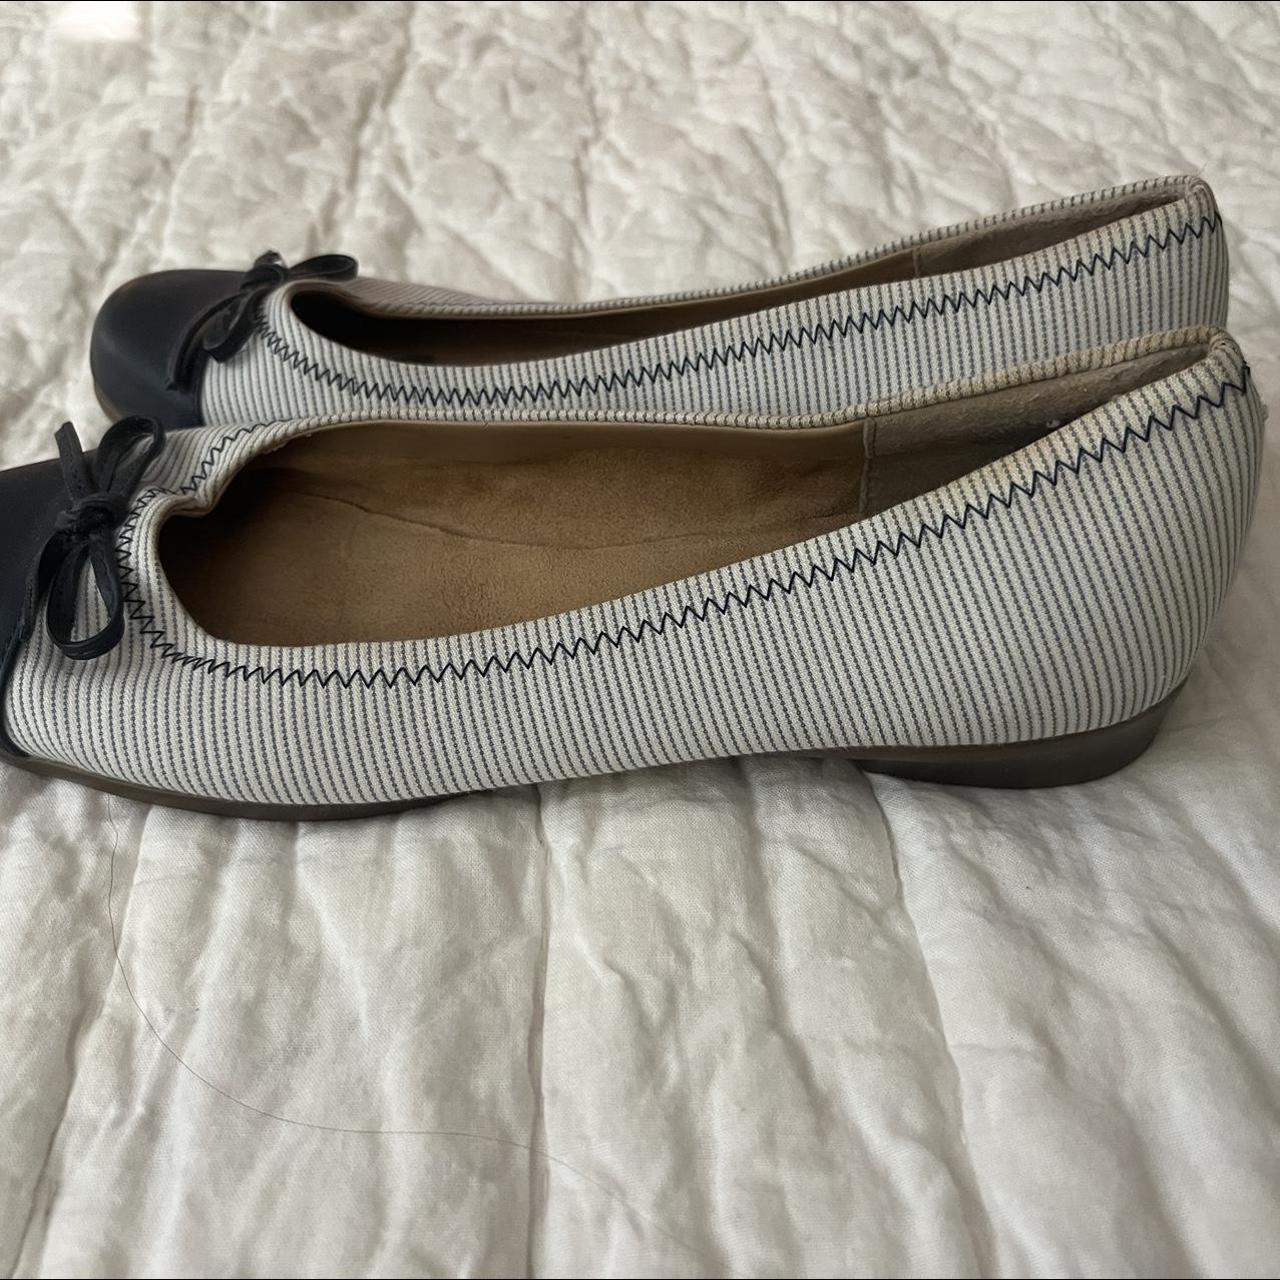 Aerosoles Women's Navy and White Ballet-shoes (2)